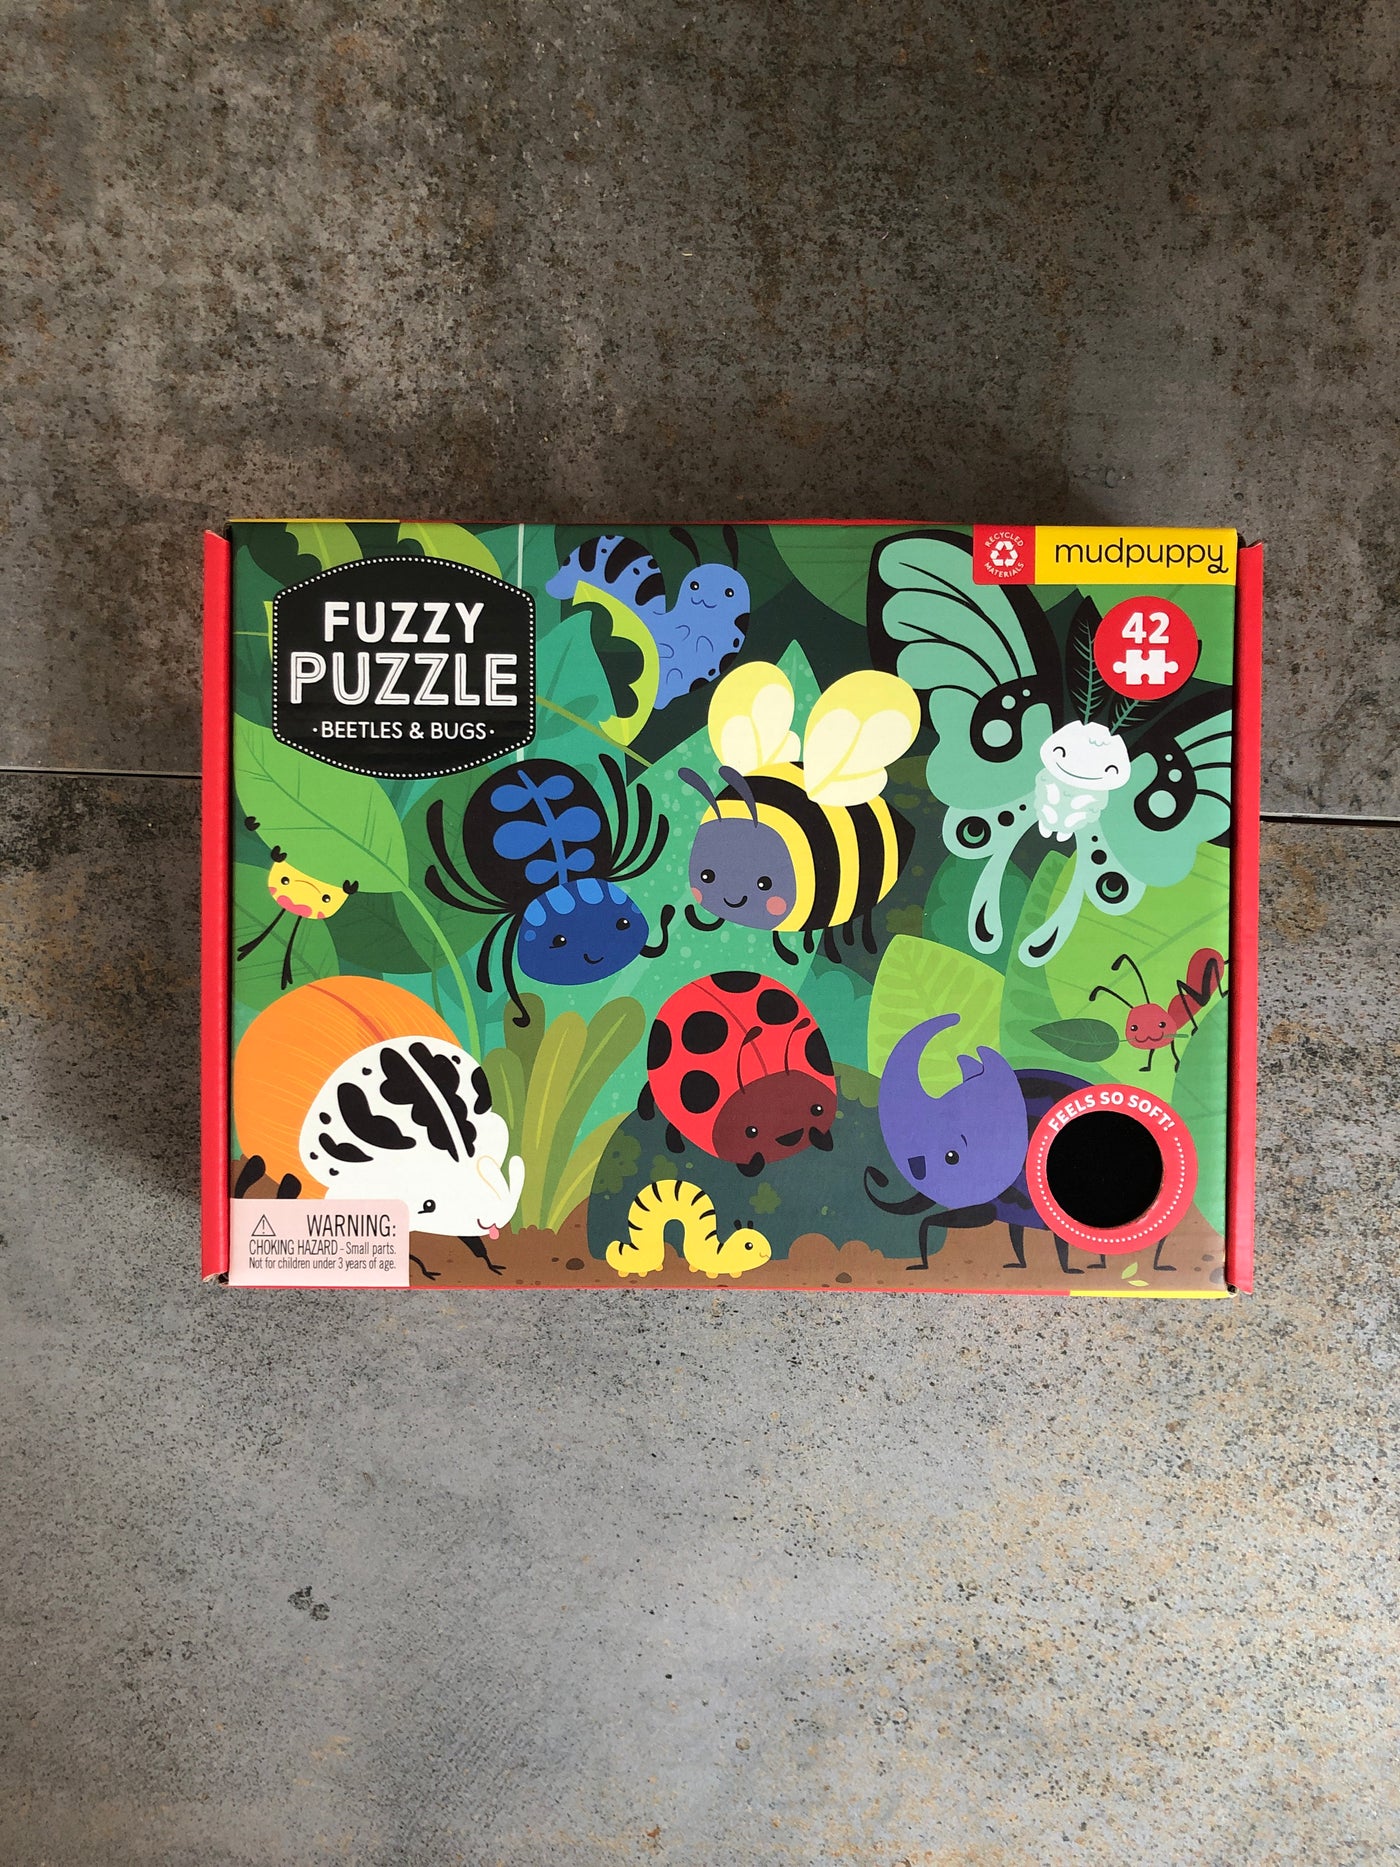 Kids Beetles & Bugs Fuzzy Puzzle by Mudpuppy, 42 Pieces